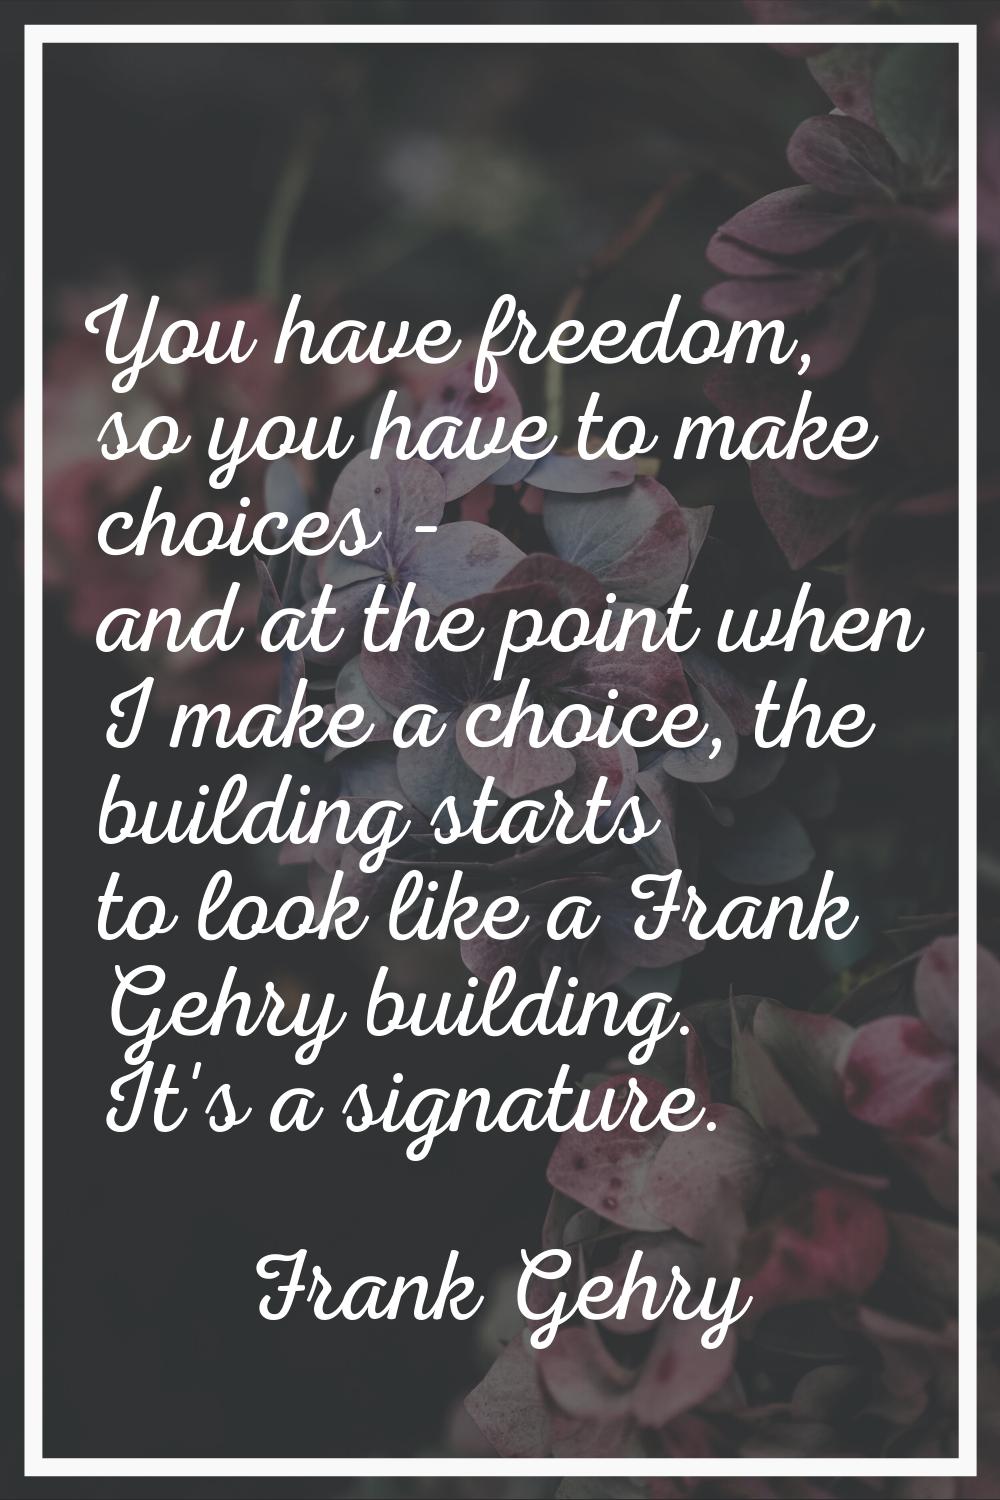 You have freedom, so you have to make choices - and at the point when I make a choice, the building